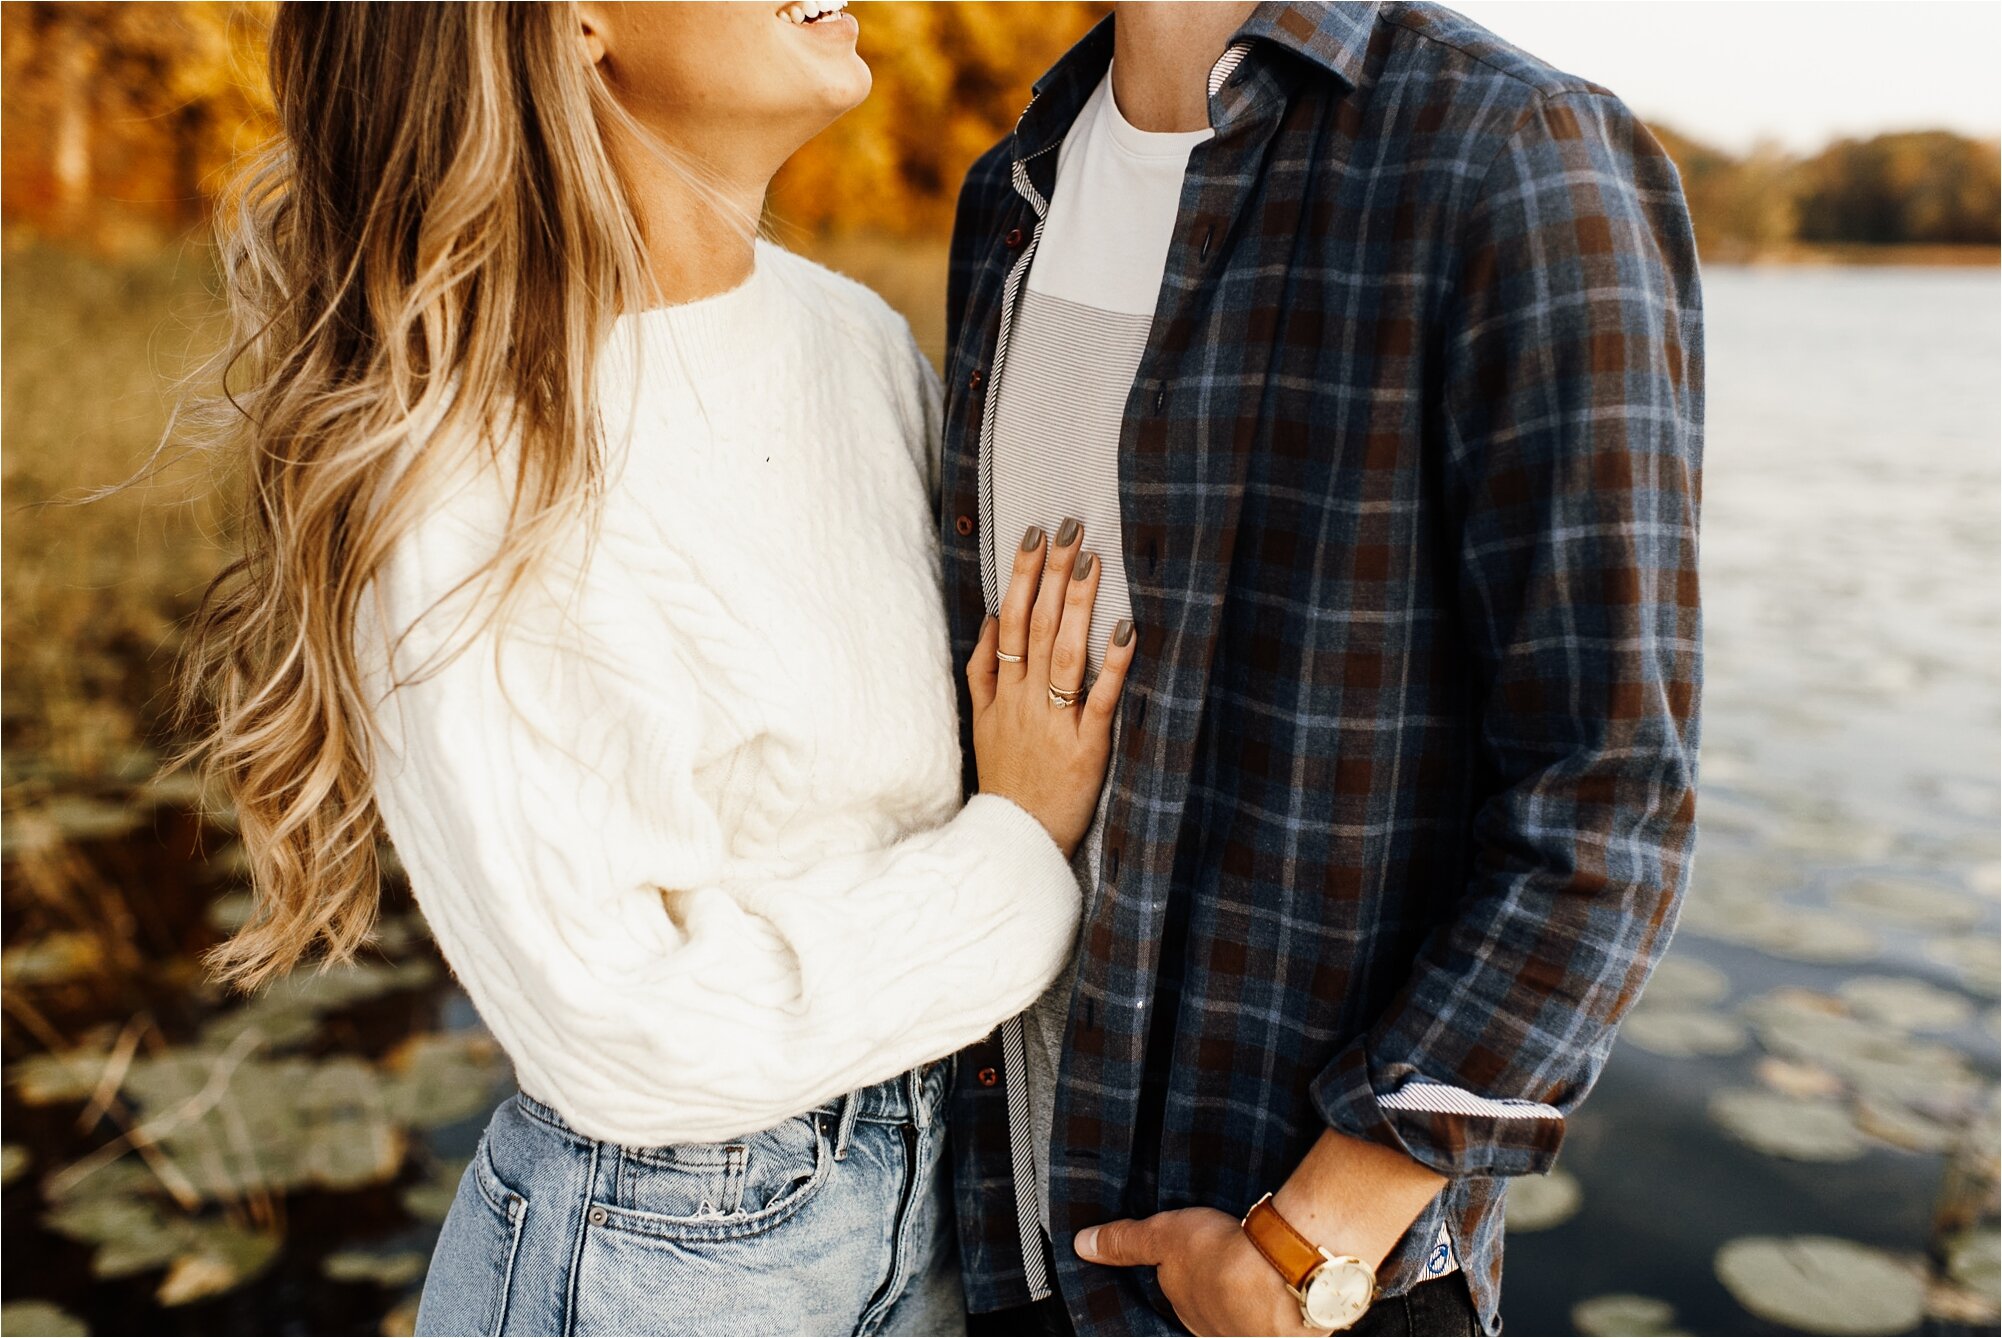  engagement session ring engaged couple bride group sweater flannel dock fall autumn 